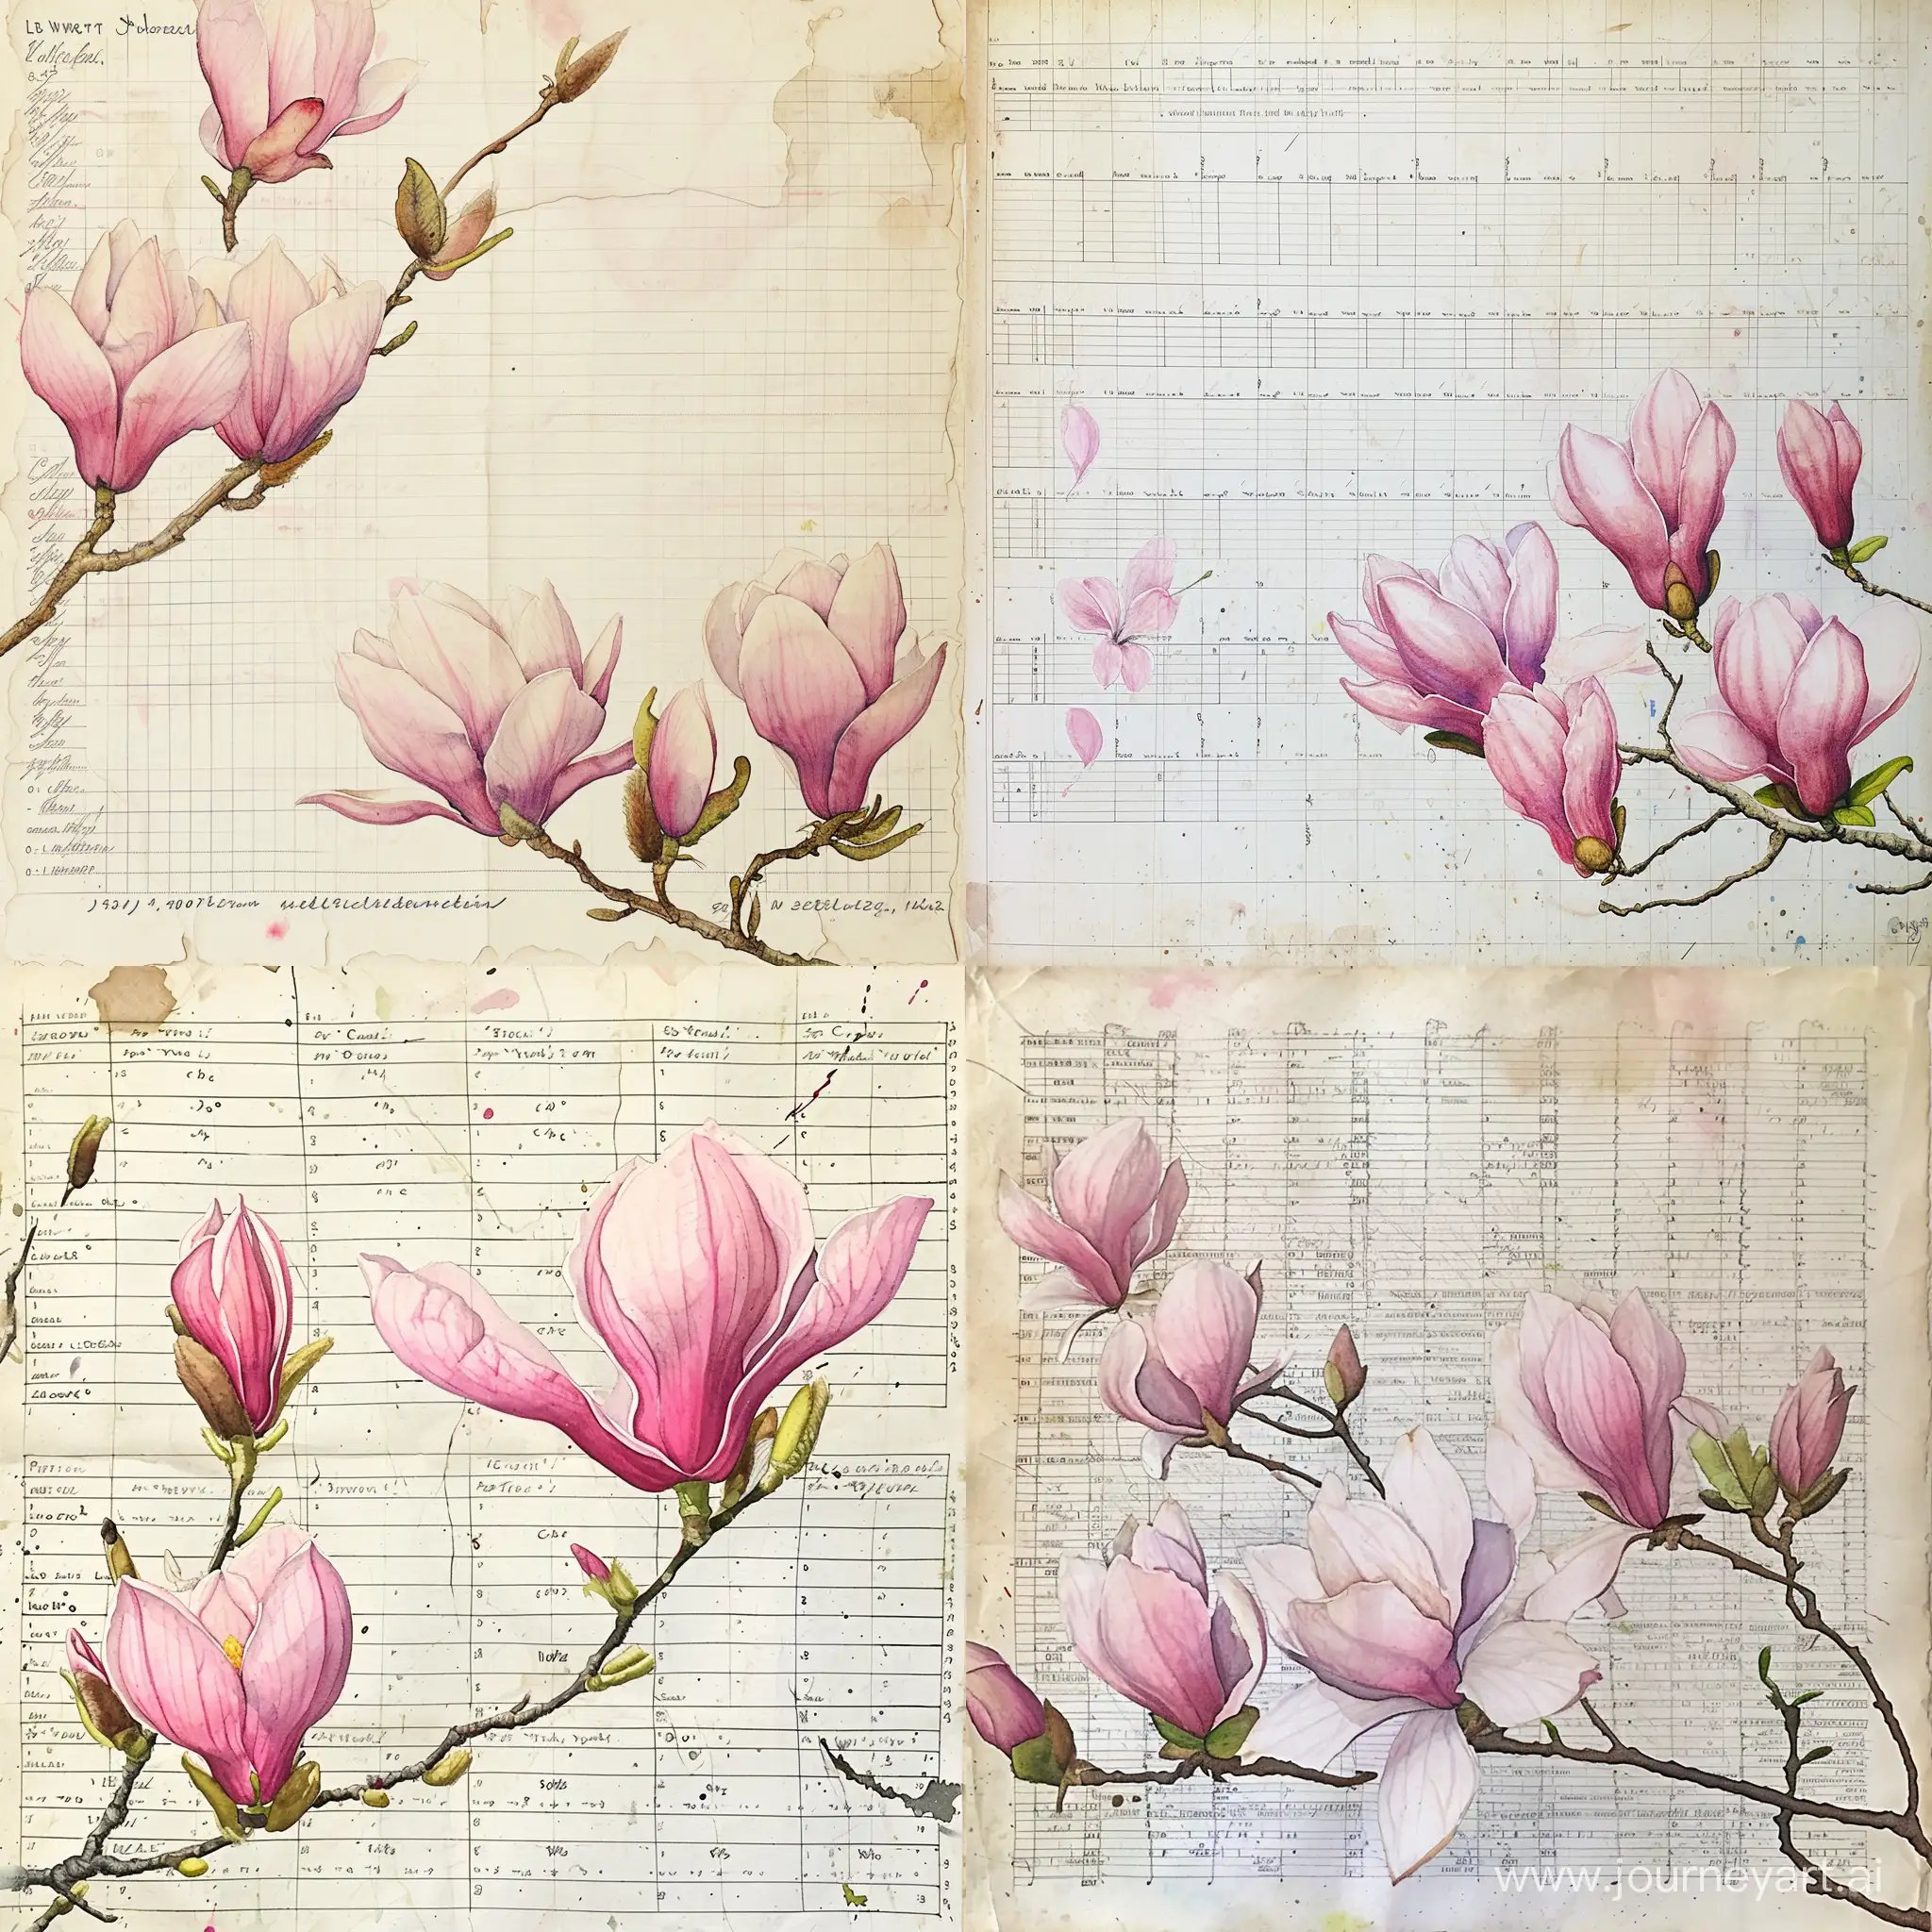 Watercolor-Magnolia-Blossoms-on-Ledger-Page